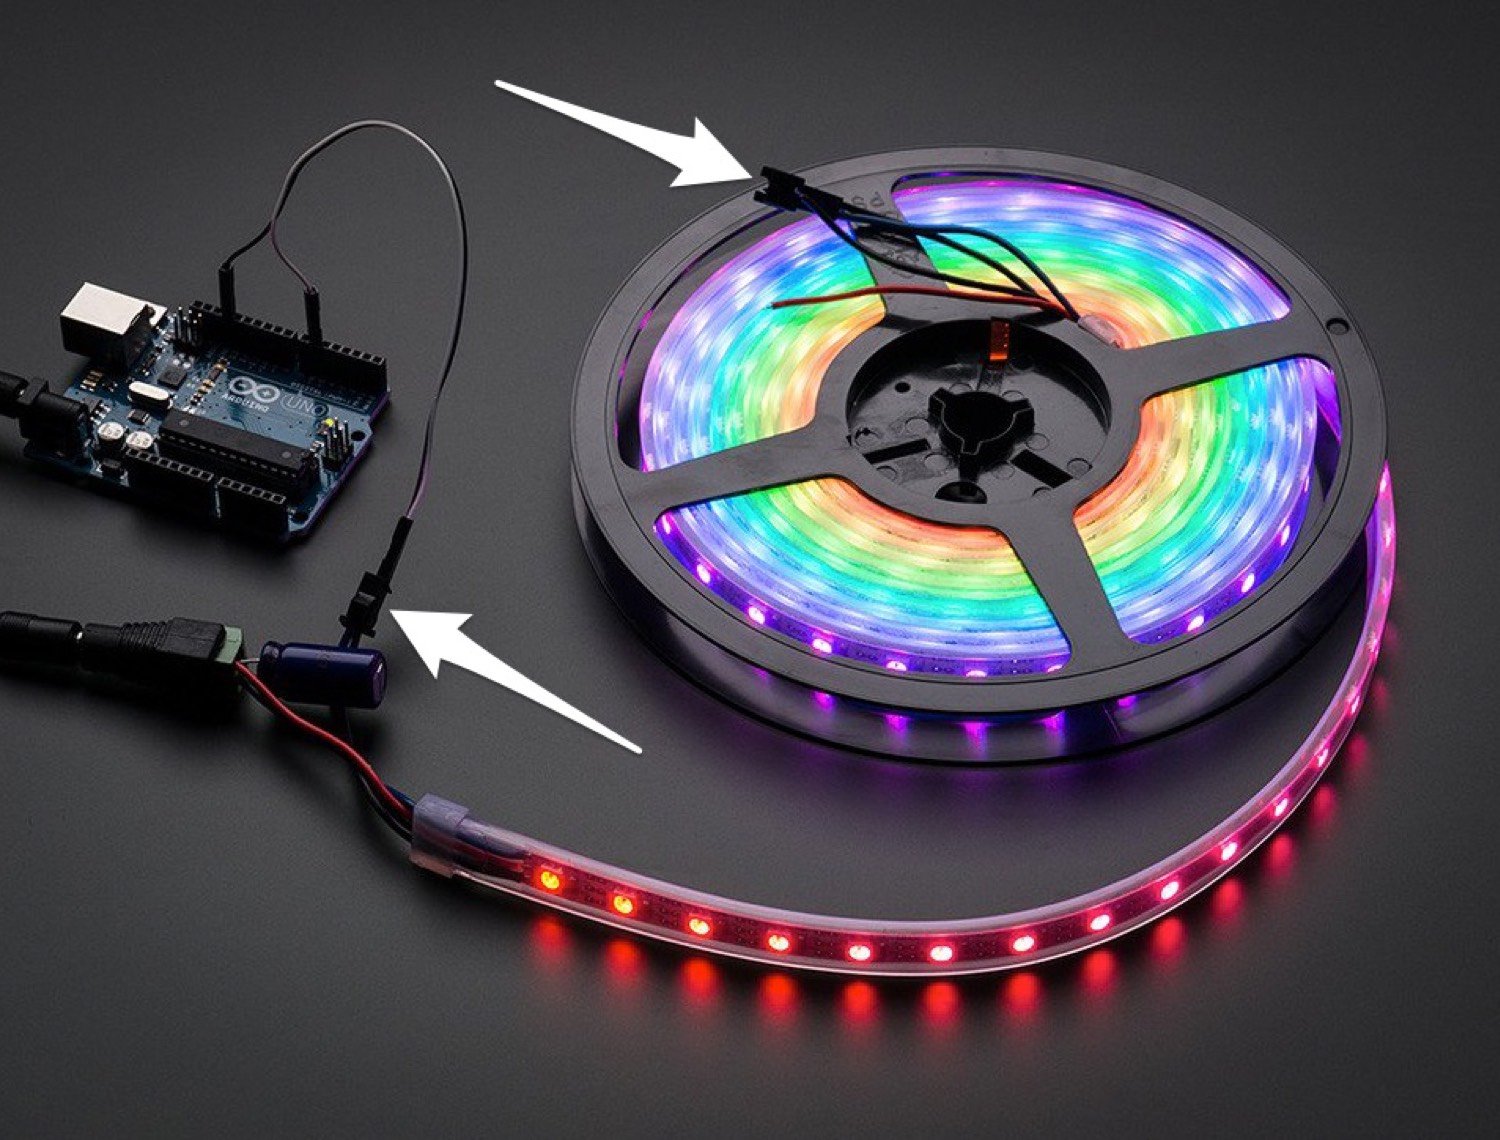 Full-length RGB LED strip in a spool, lit up in rainbow colors. Diagram arrows indicate the LED strip's built-in connectors. One at the end of the spool connects to an Arduino which is driving the strip. The other connector is at the center of the spool.